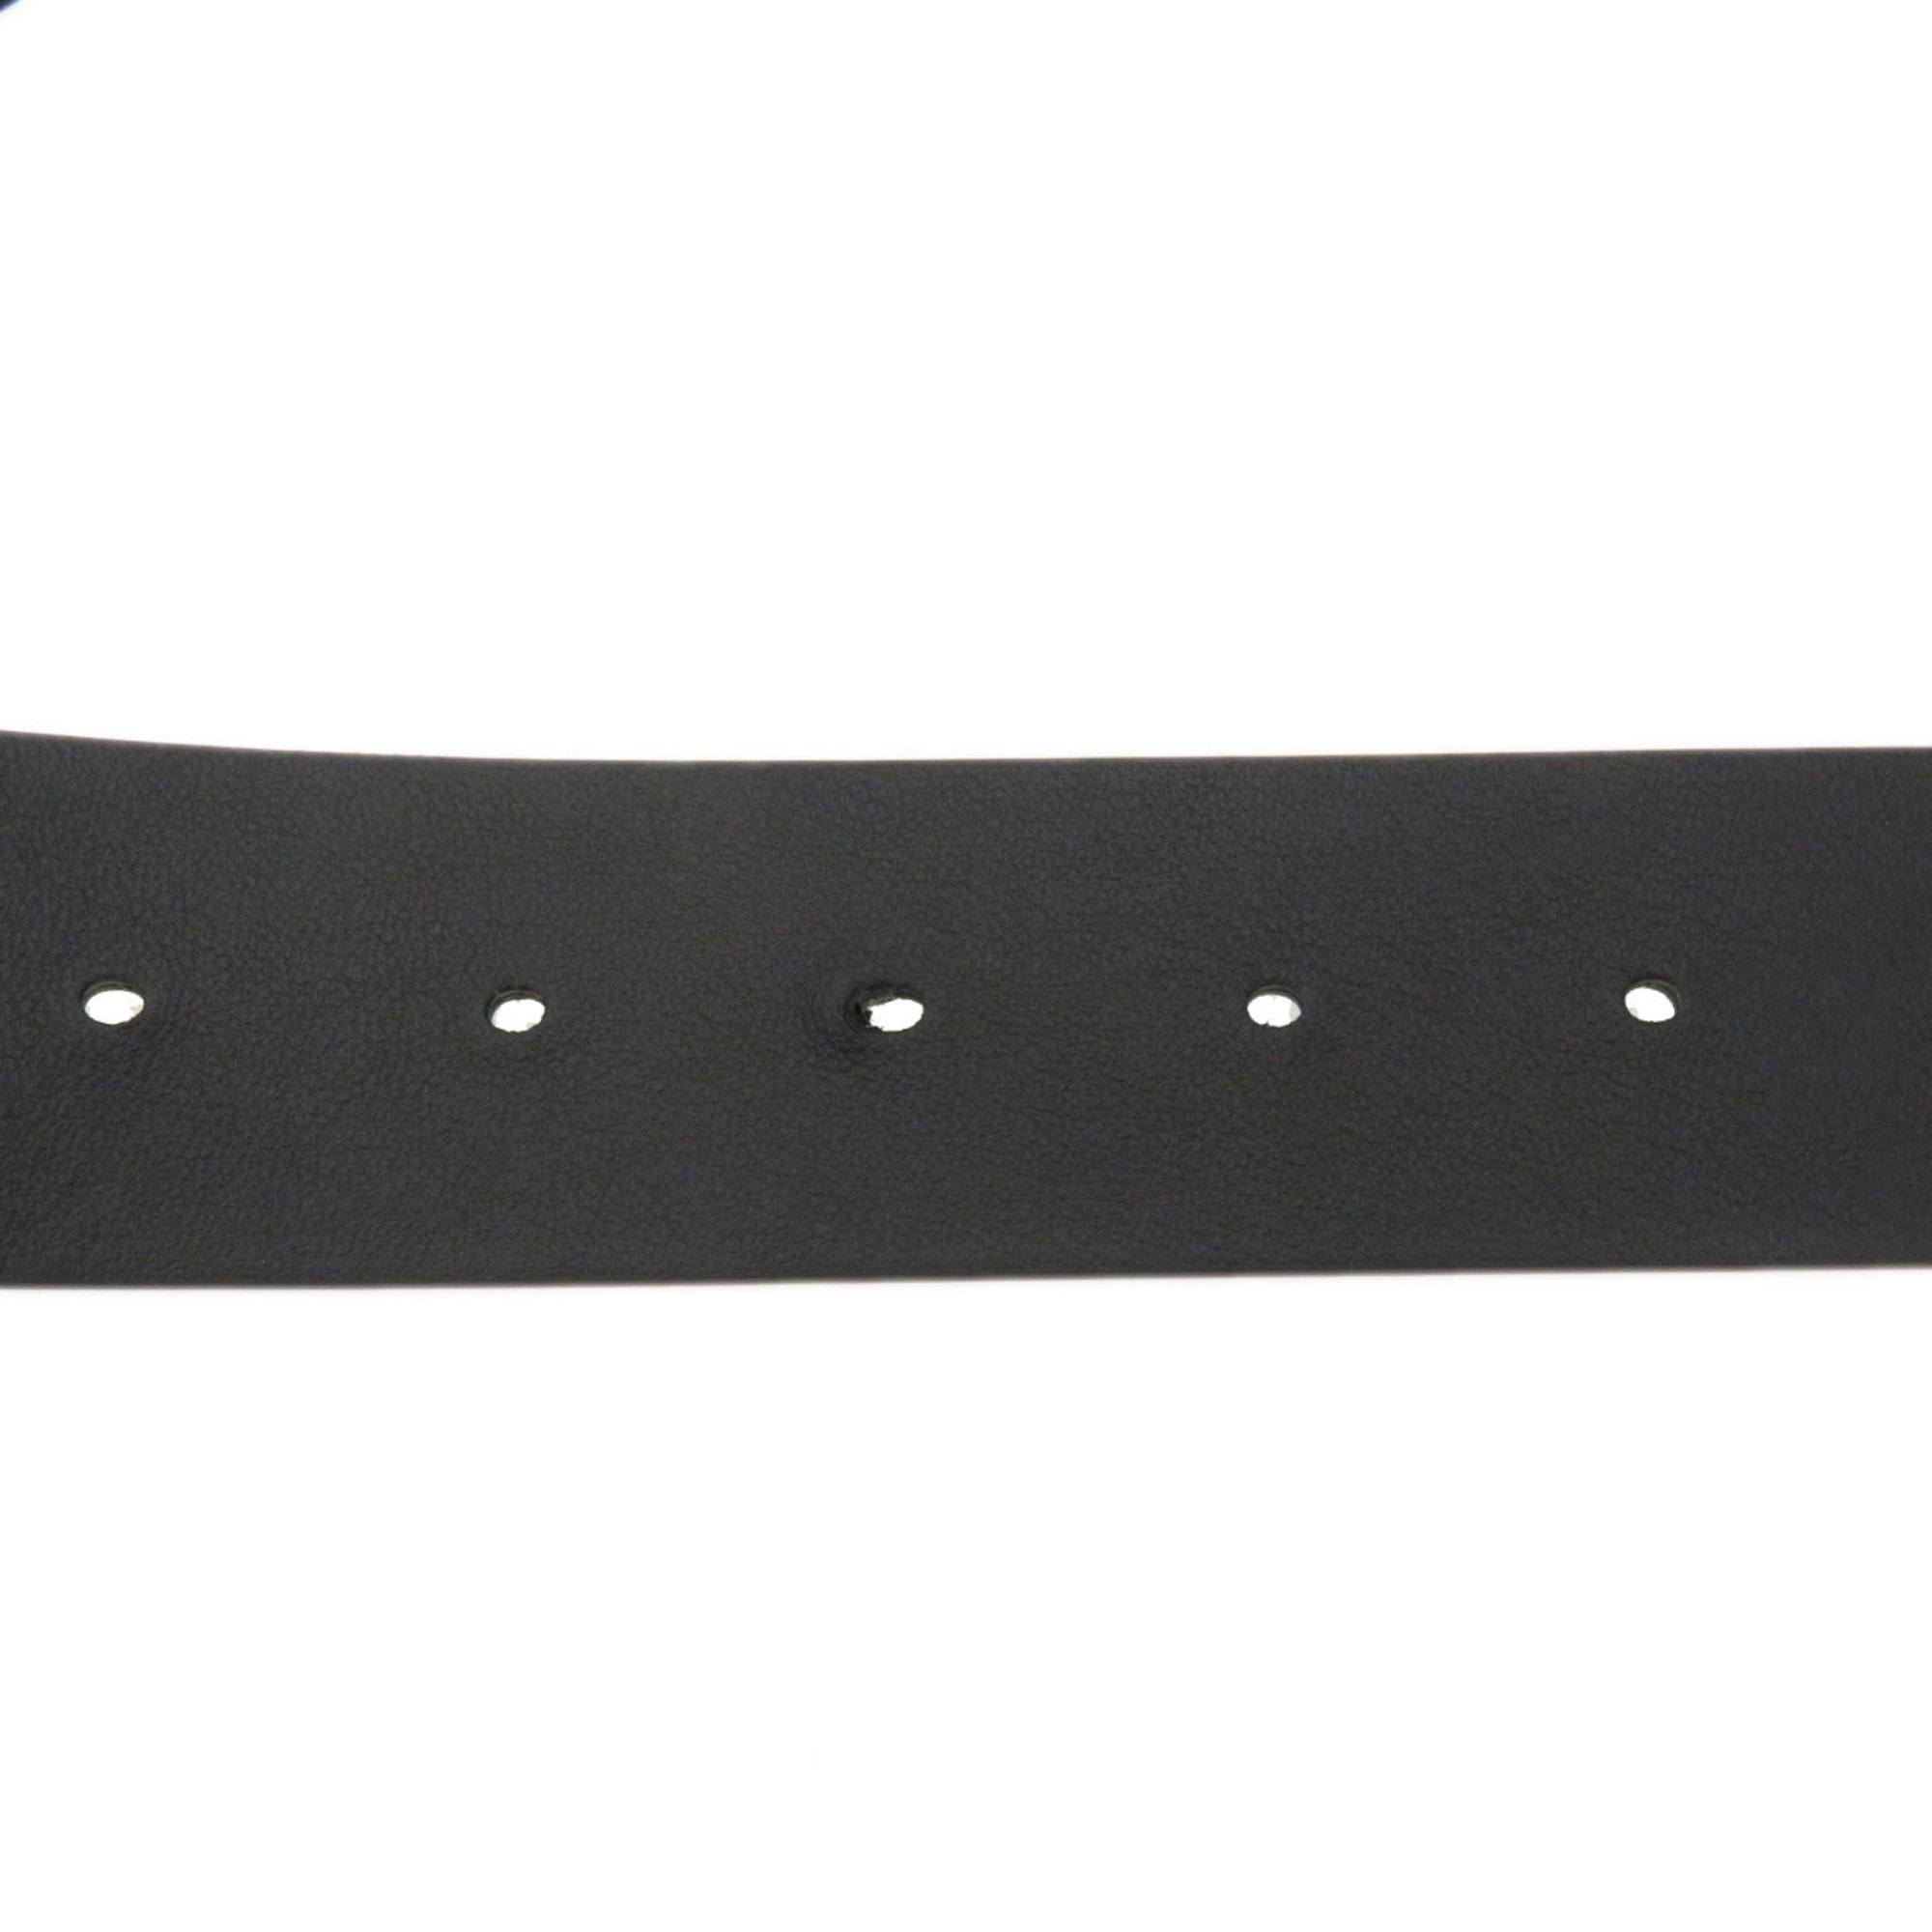 Christian Dior 80cm Belt in Calf Leather for Women CHRISTIAN DIOR